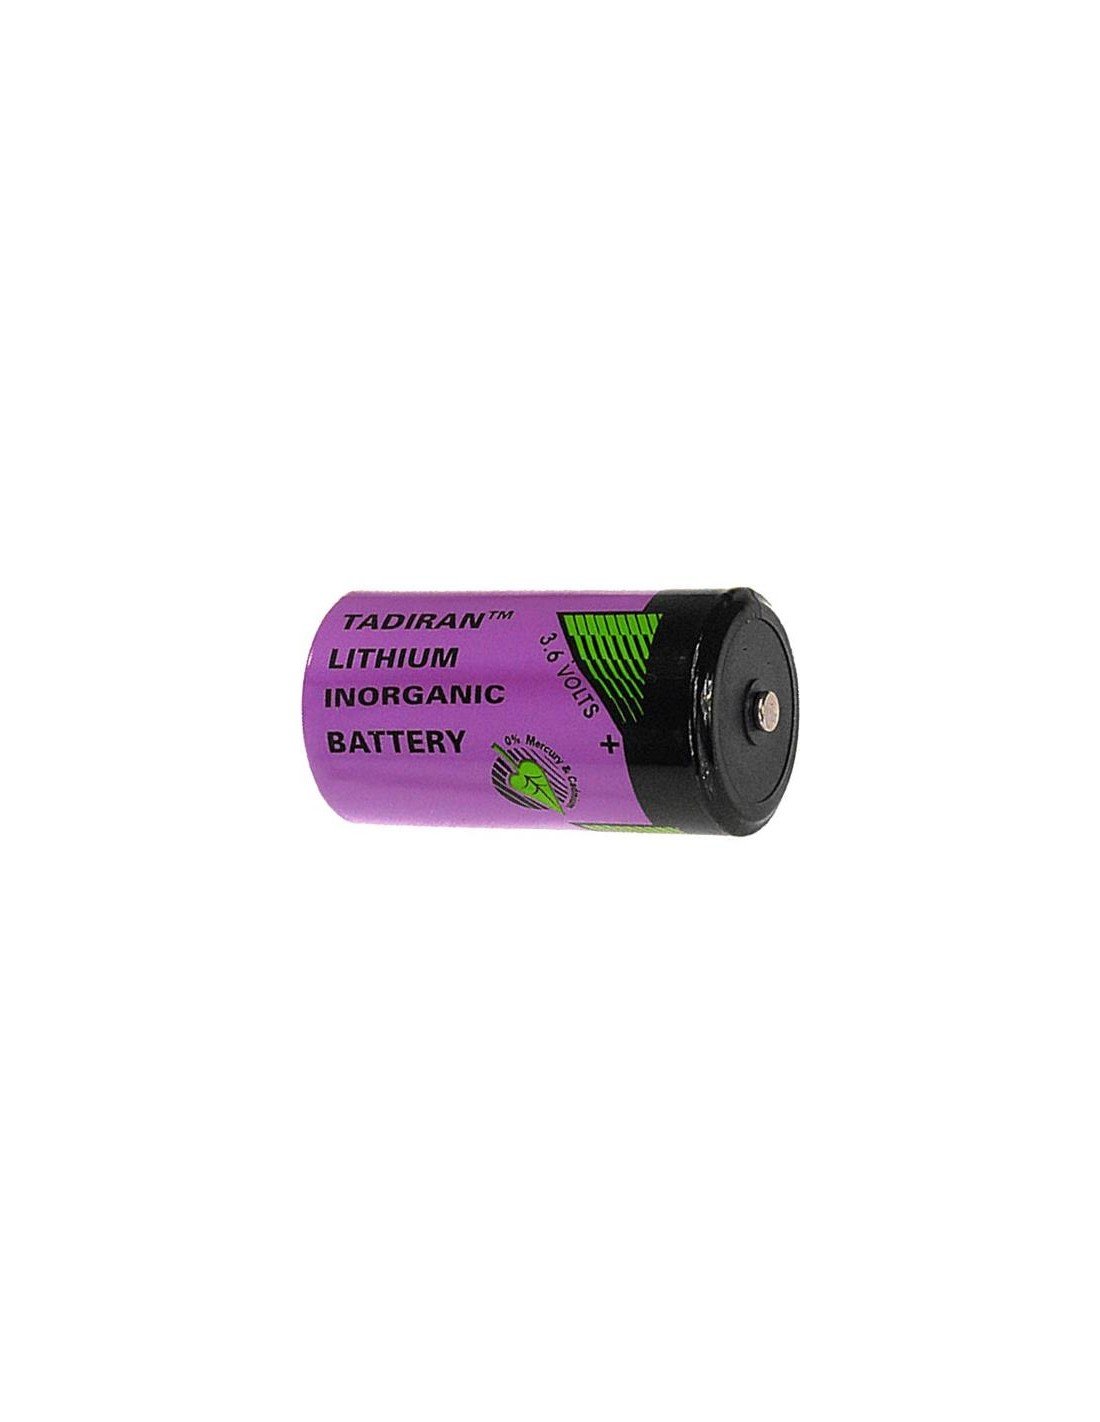 Tadiran TL-5920/S 3.6V C Size 8500Mah Lithium Battery replaces ER26500 & LS26500 3.6V - Non Rechargeable